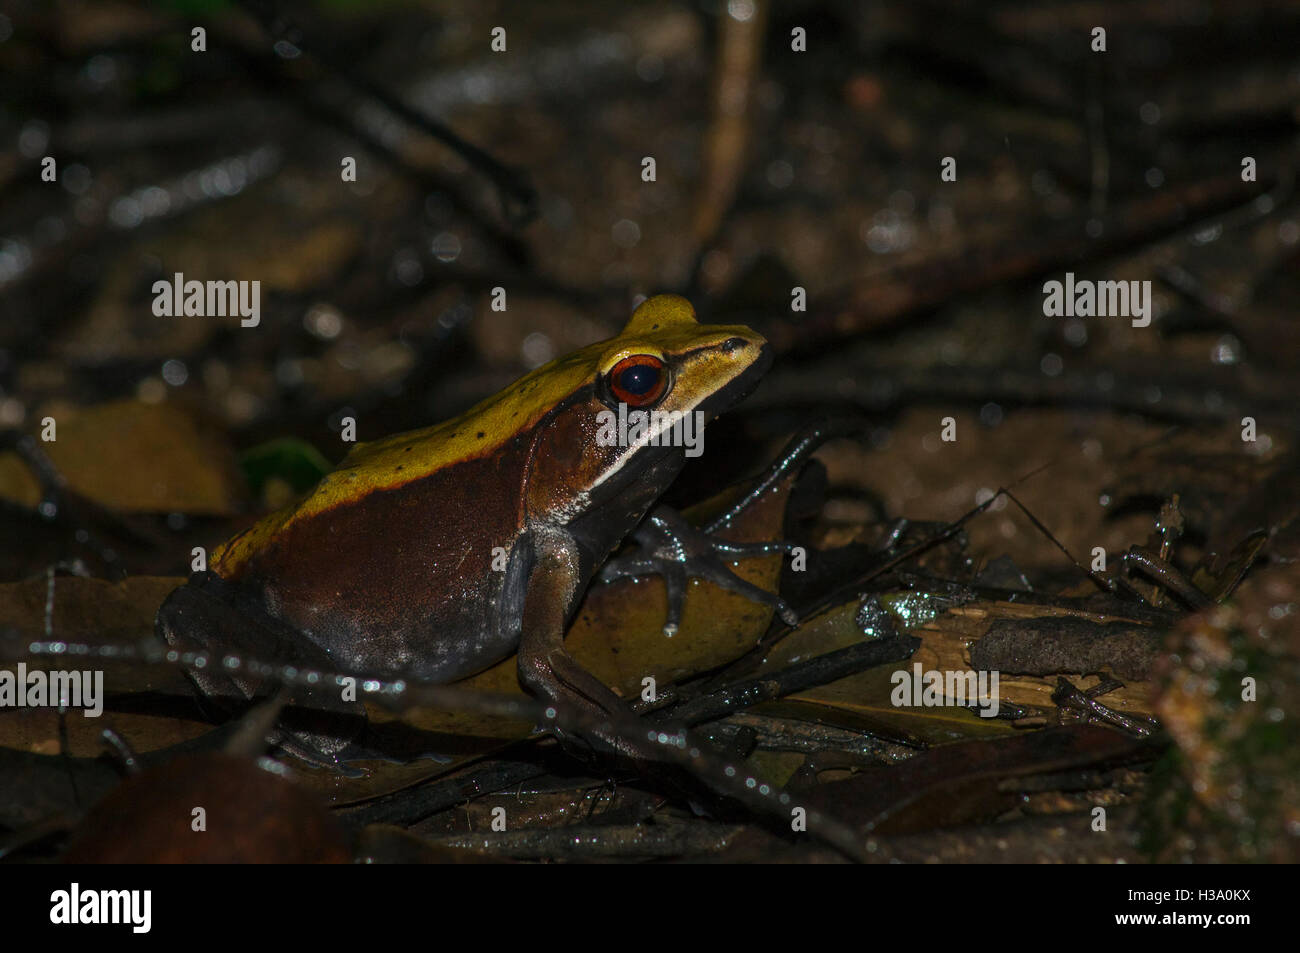 A bicolored frog from the Forest Park at the hill station in Amboli,Maharashtra Stock Photo